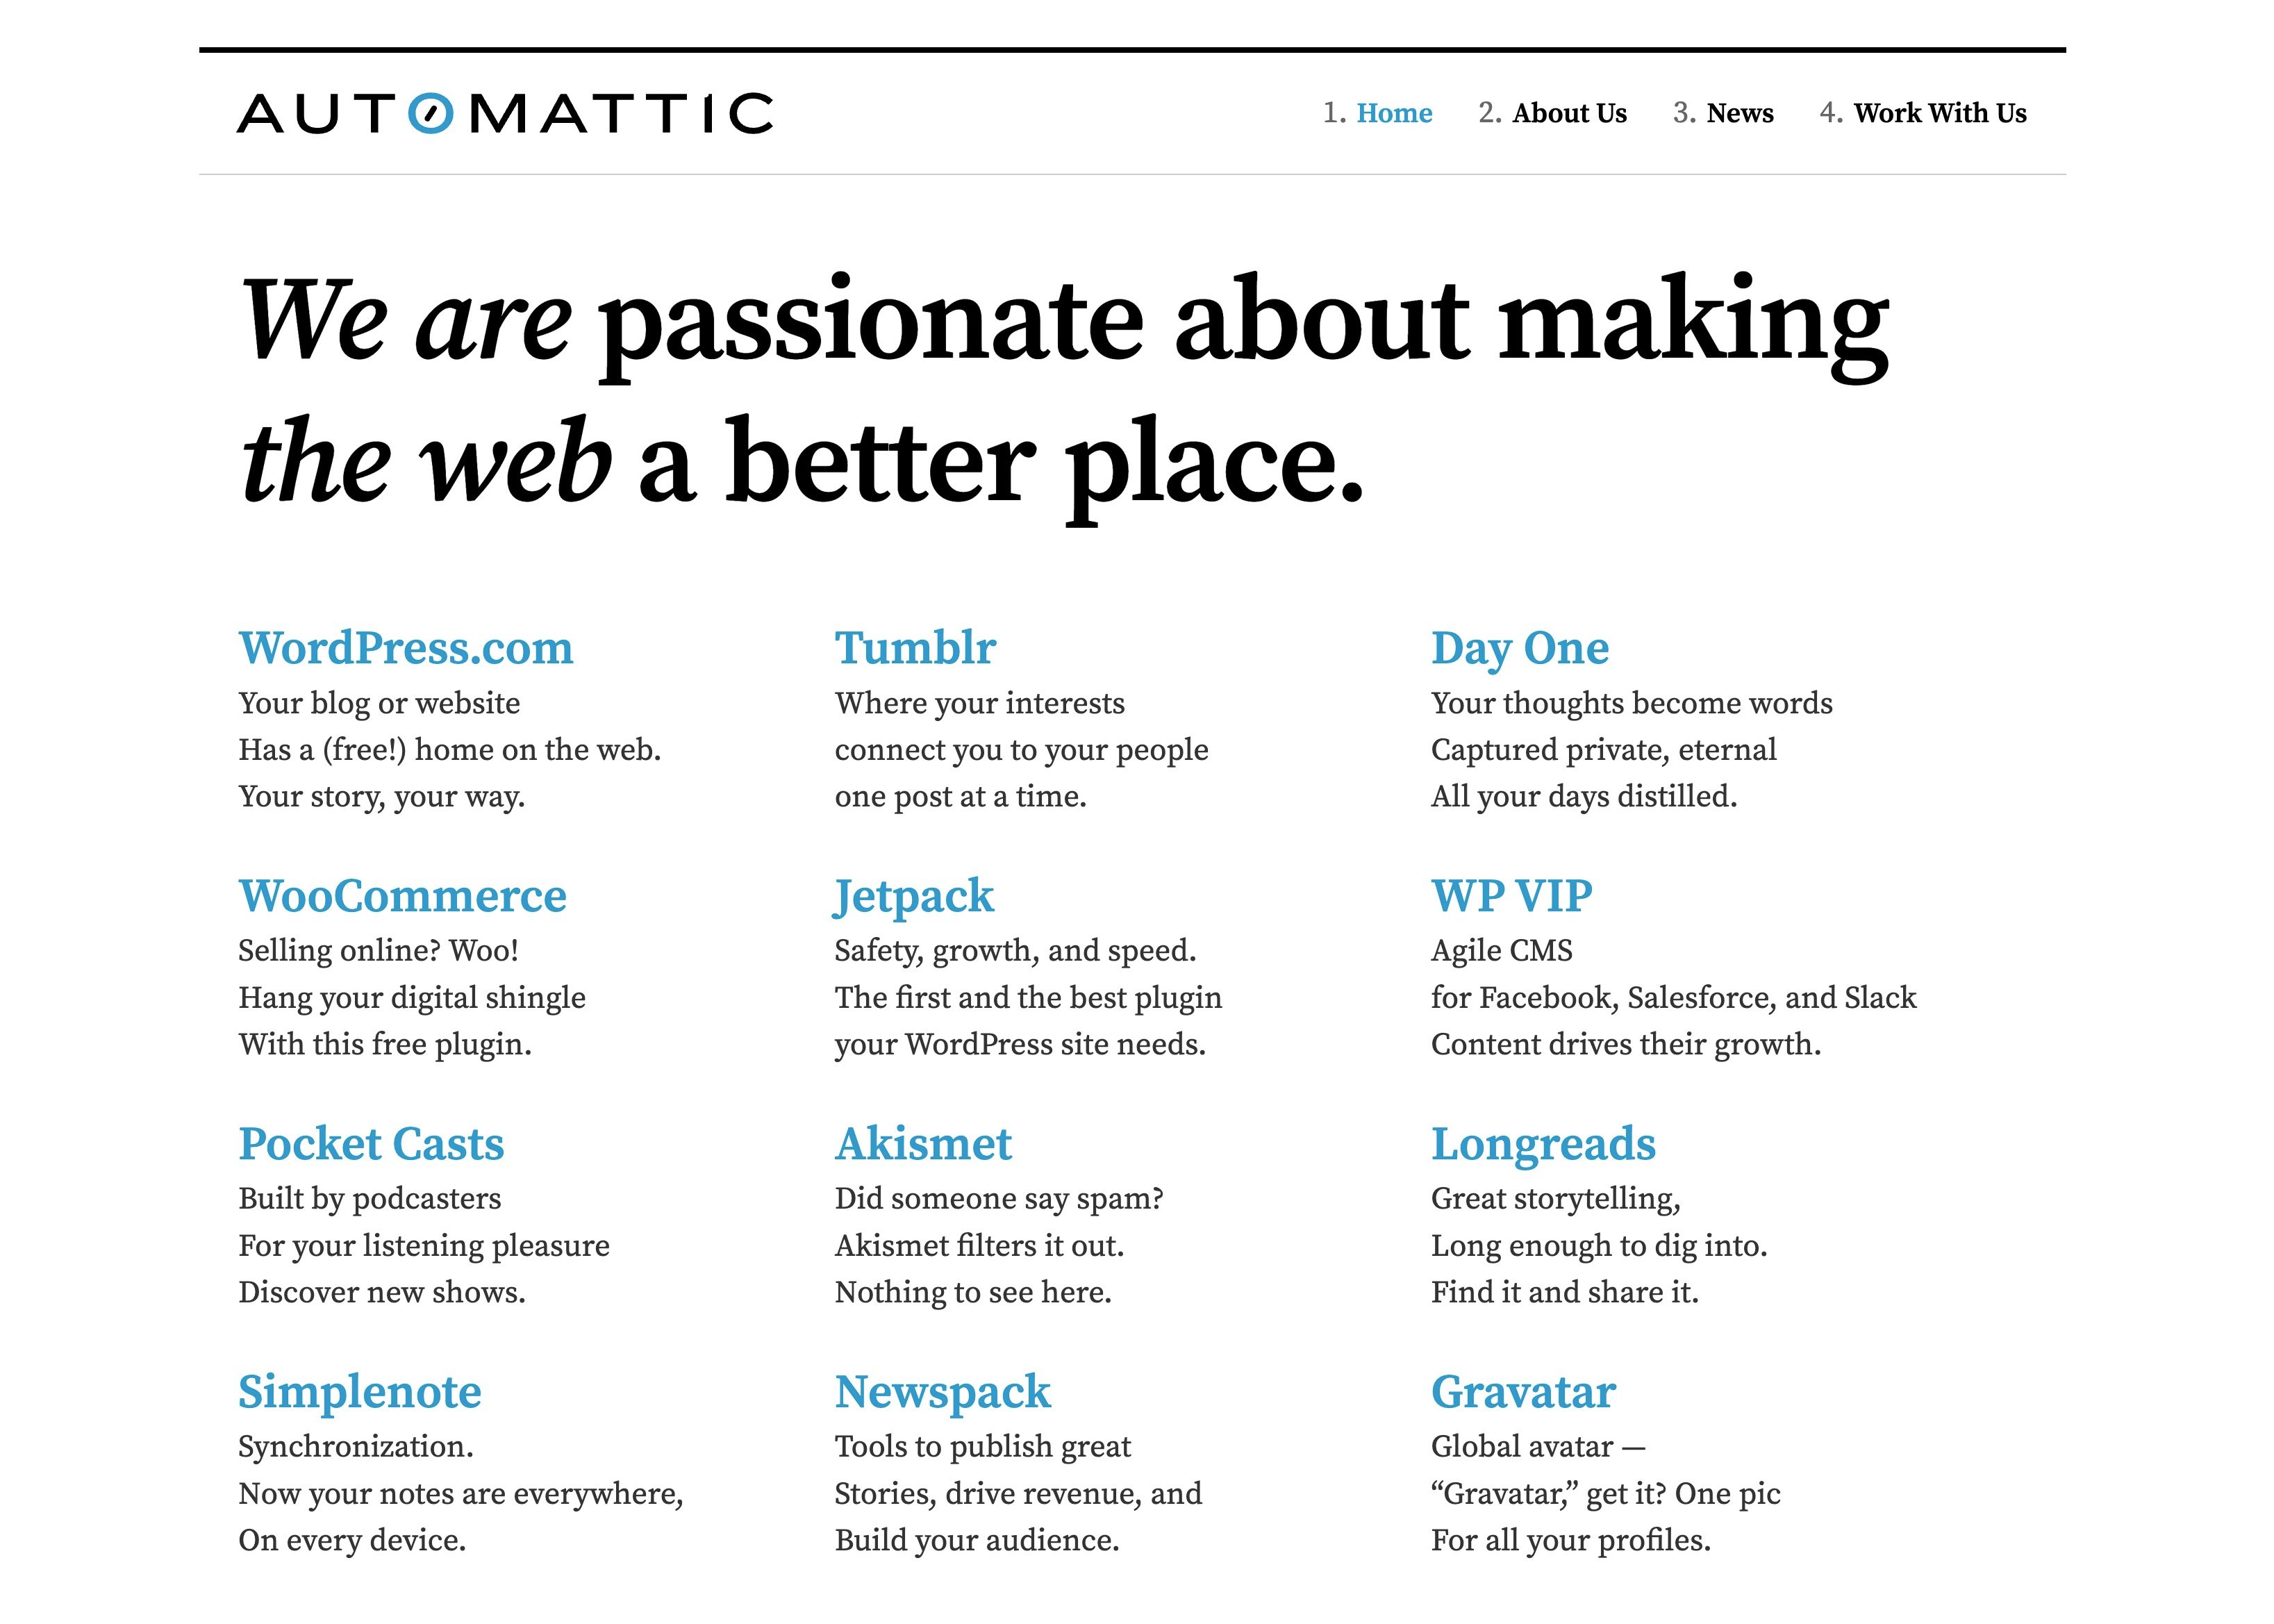 The Automattic website and its main products.